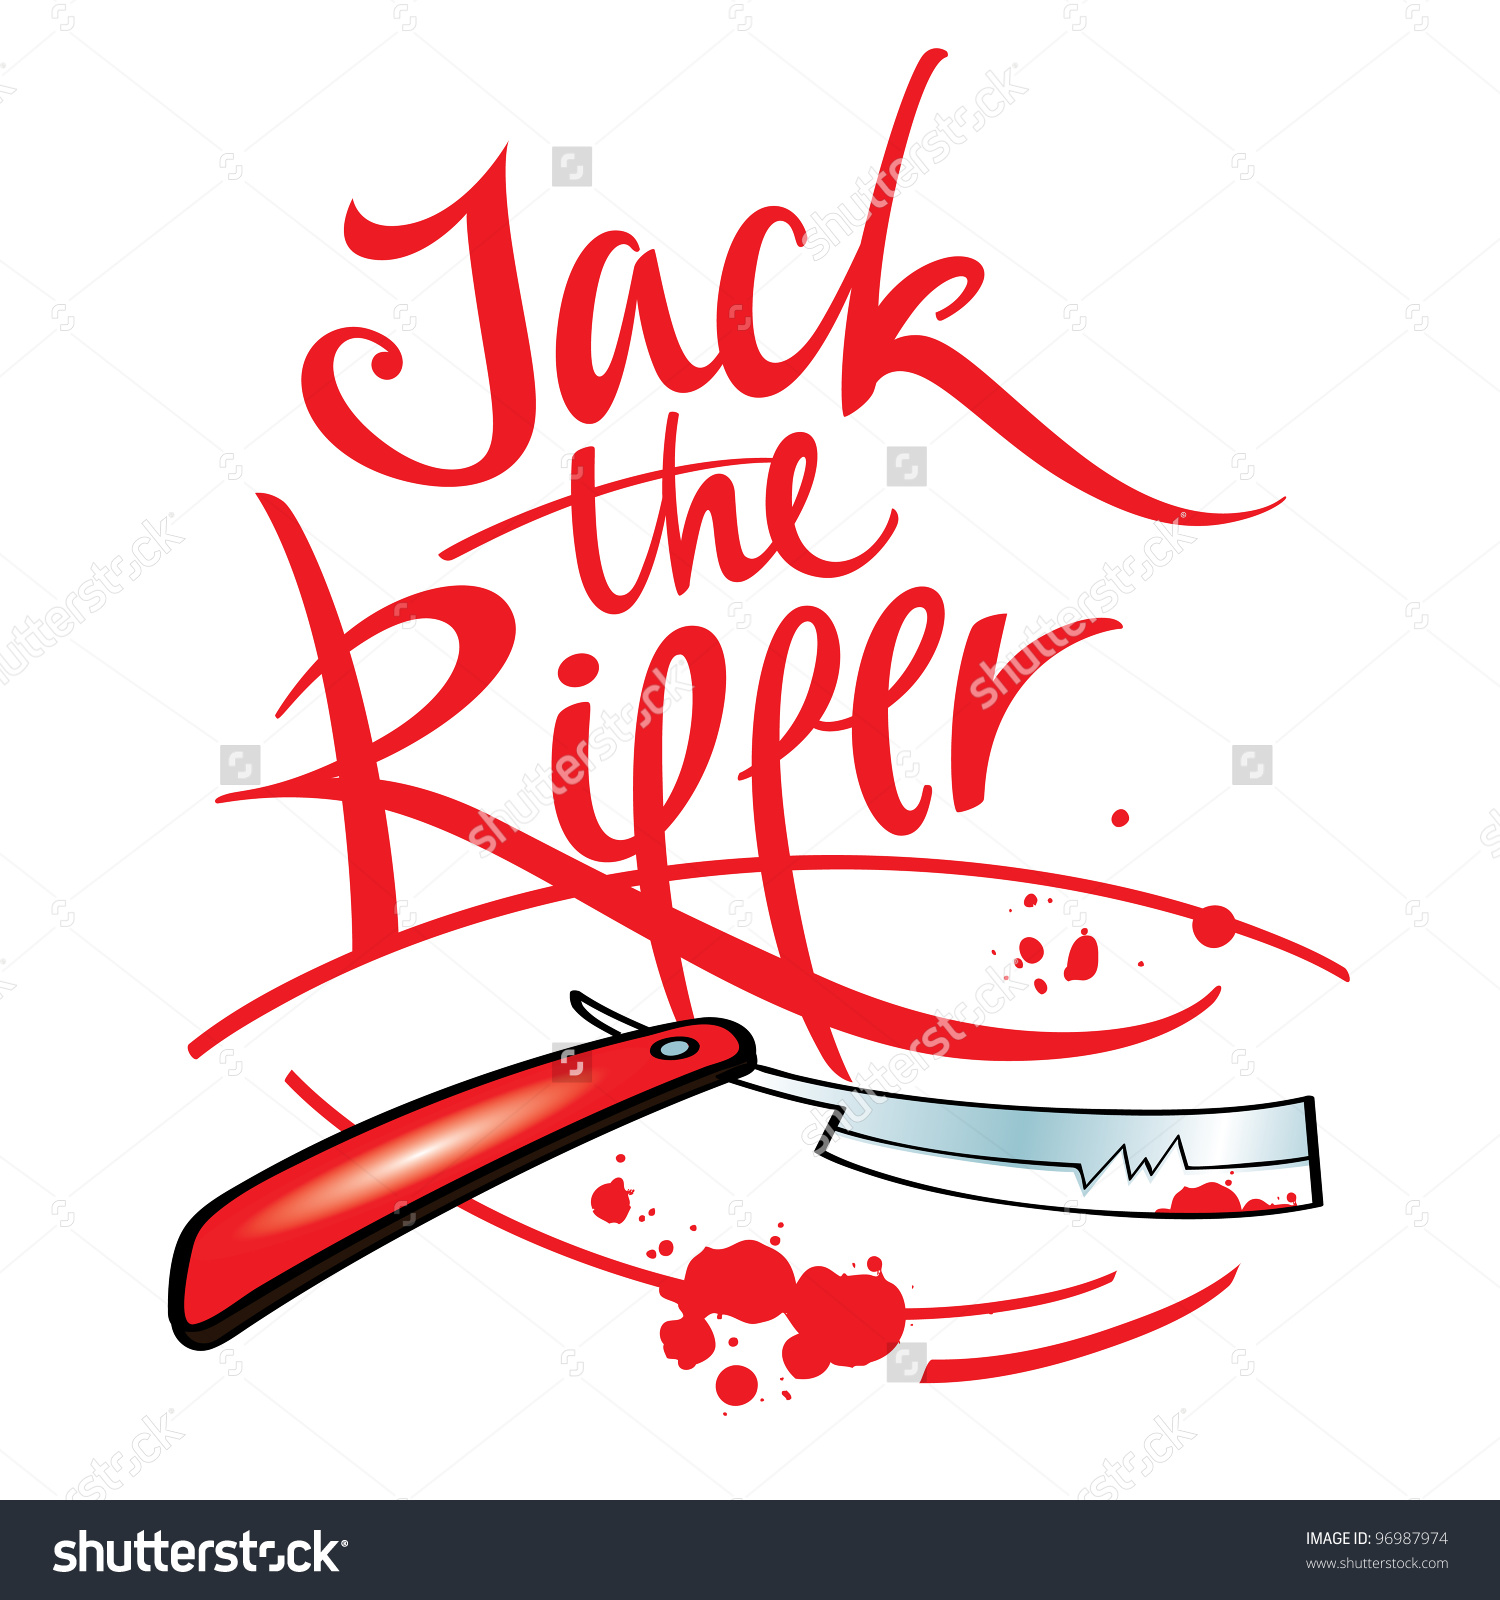 Jack The Ripper clipart #1, Download drawings